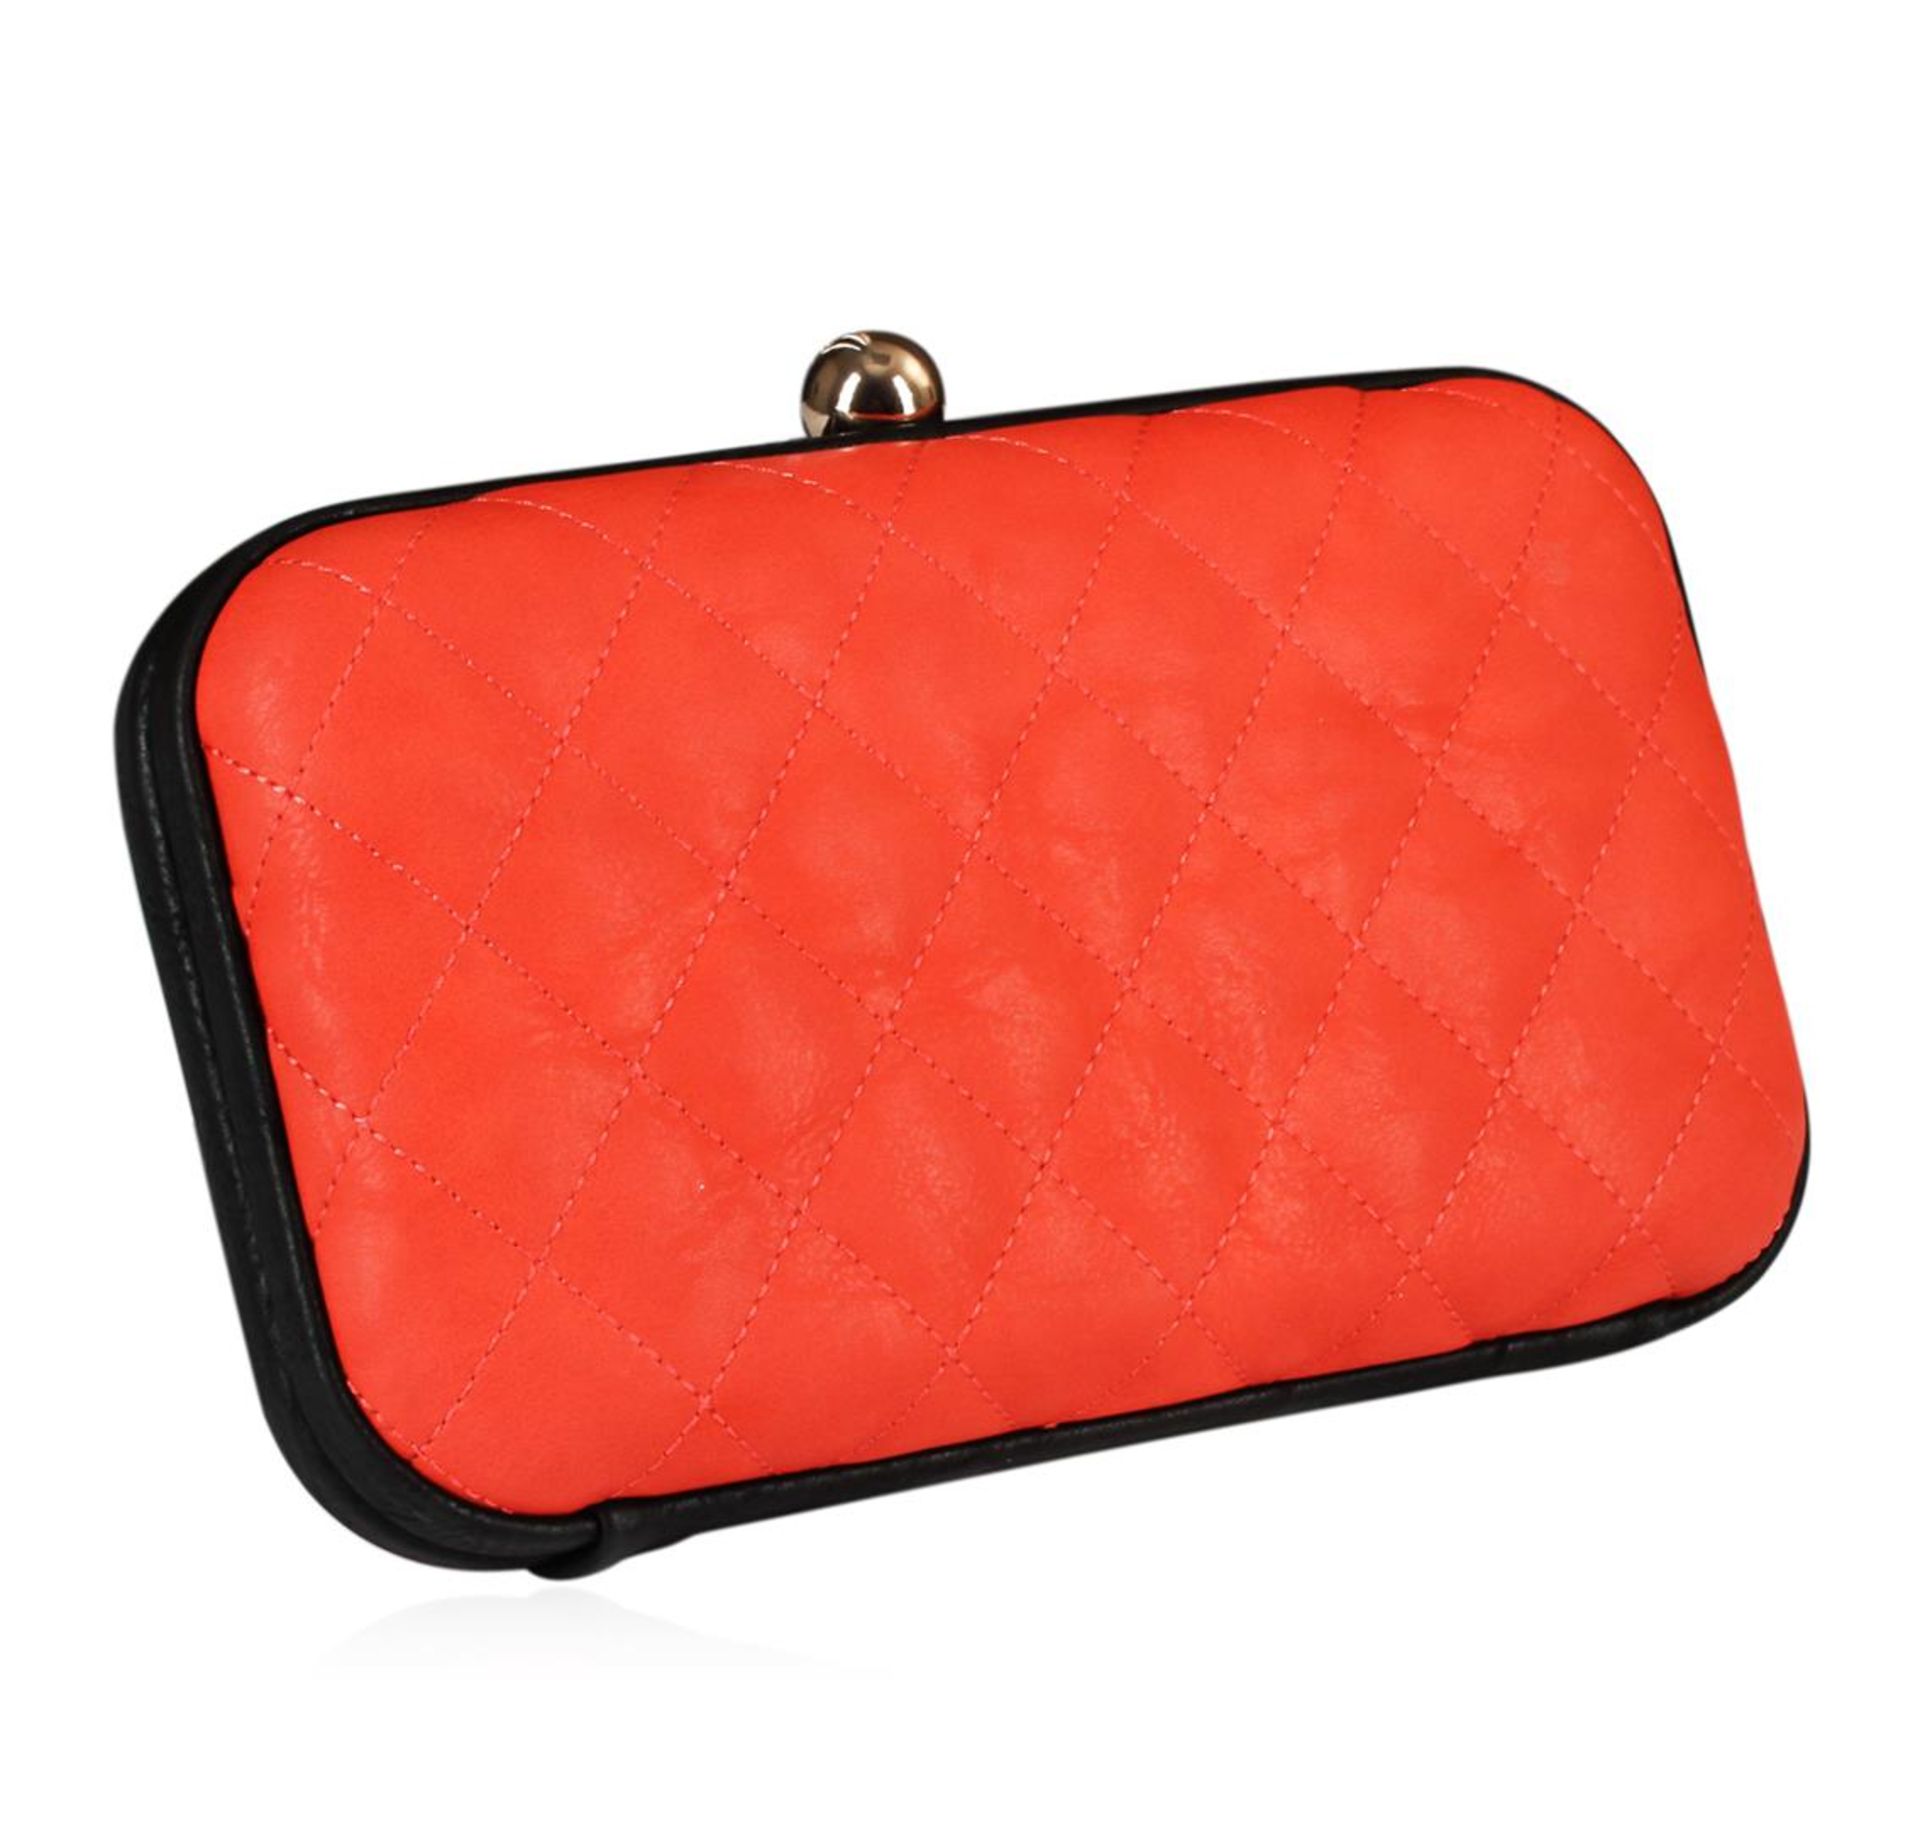 Coral Tufted Evening Clutch - Image 2 of 3